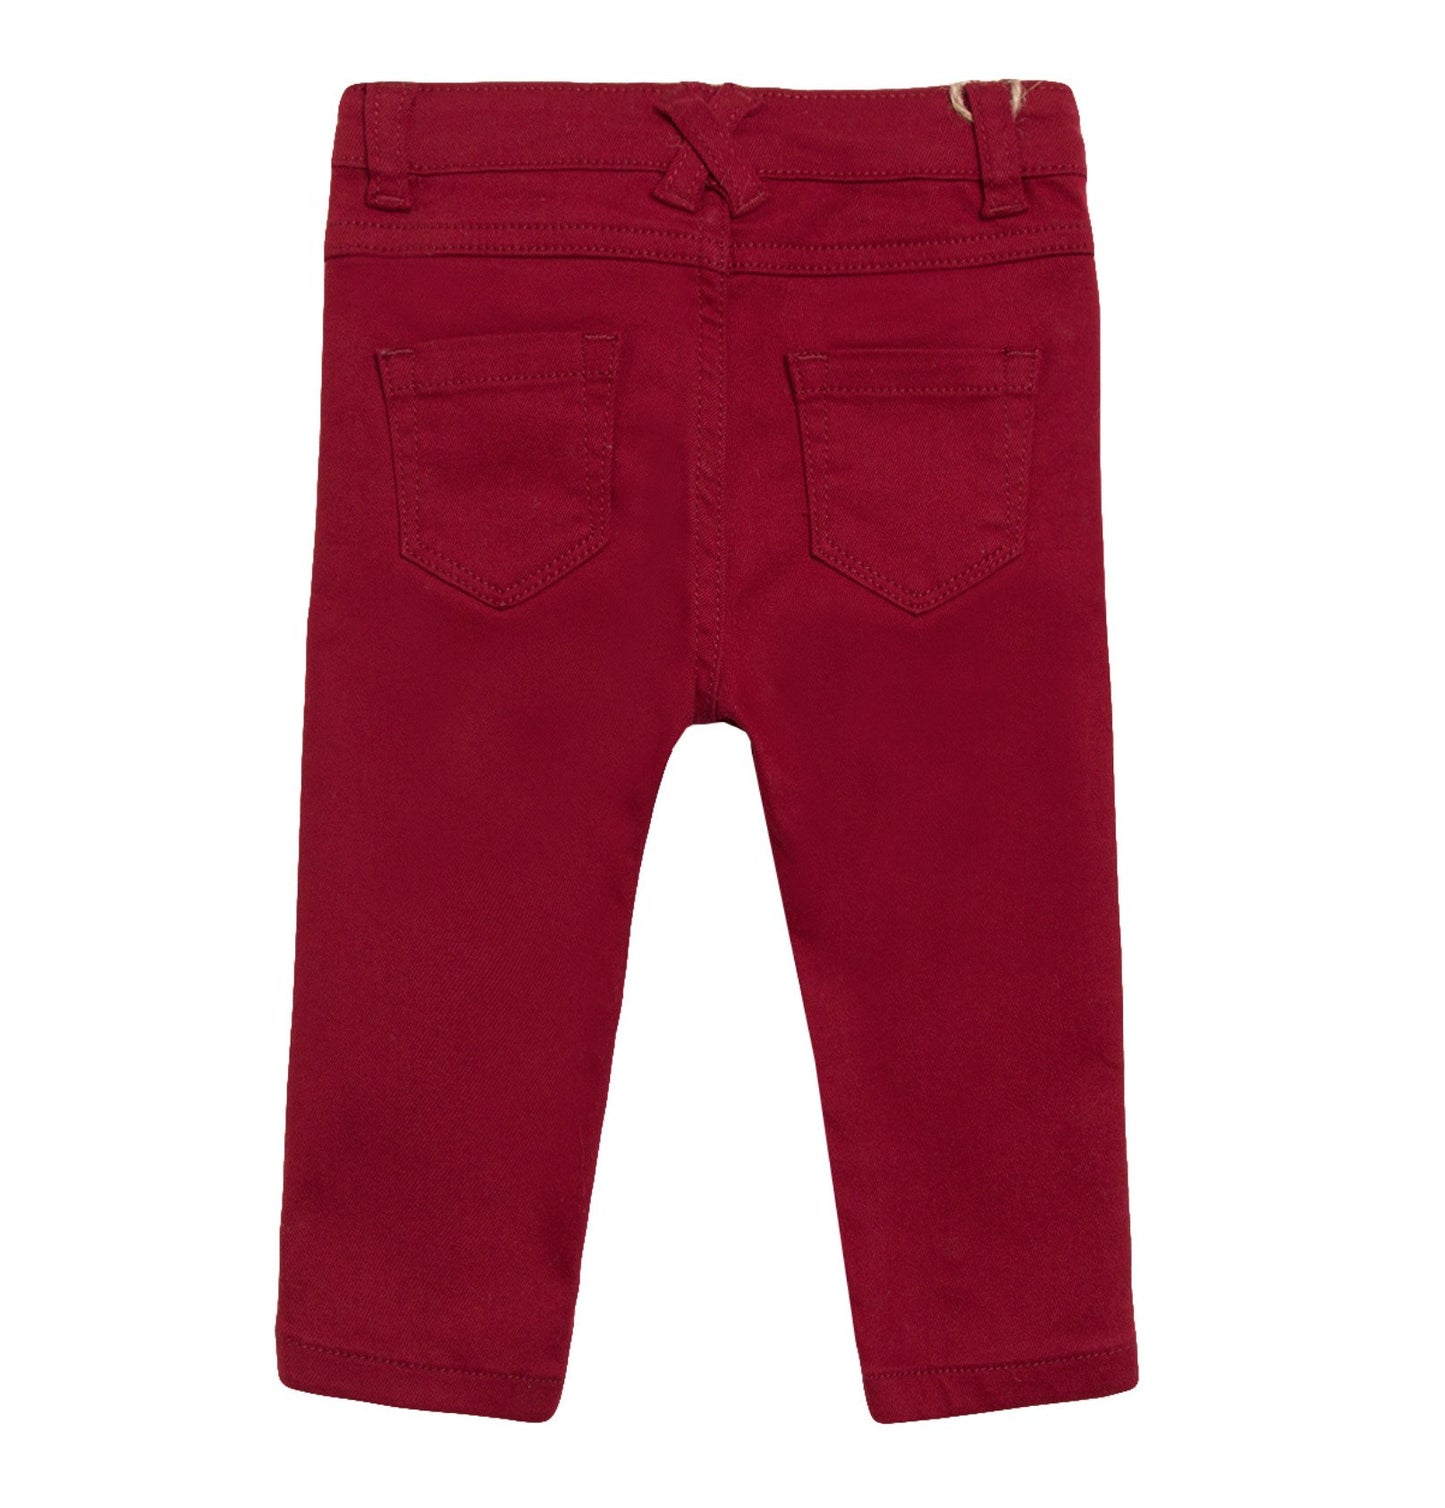 Red Slim Elasticated Baby Unisex Jeans - 0 to 6 months - Stylemykid.com